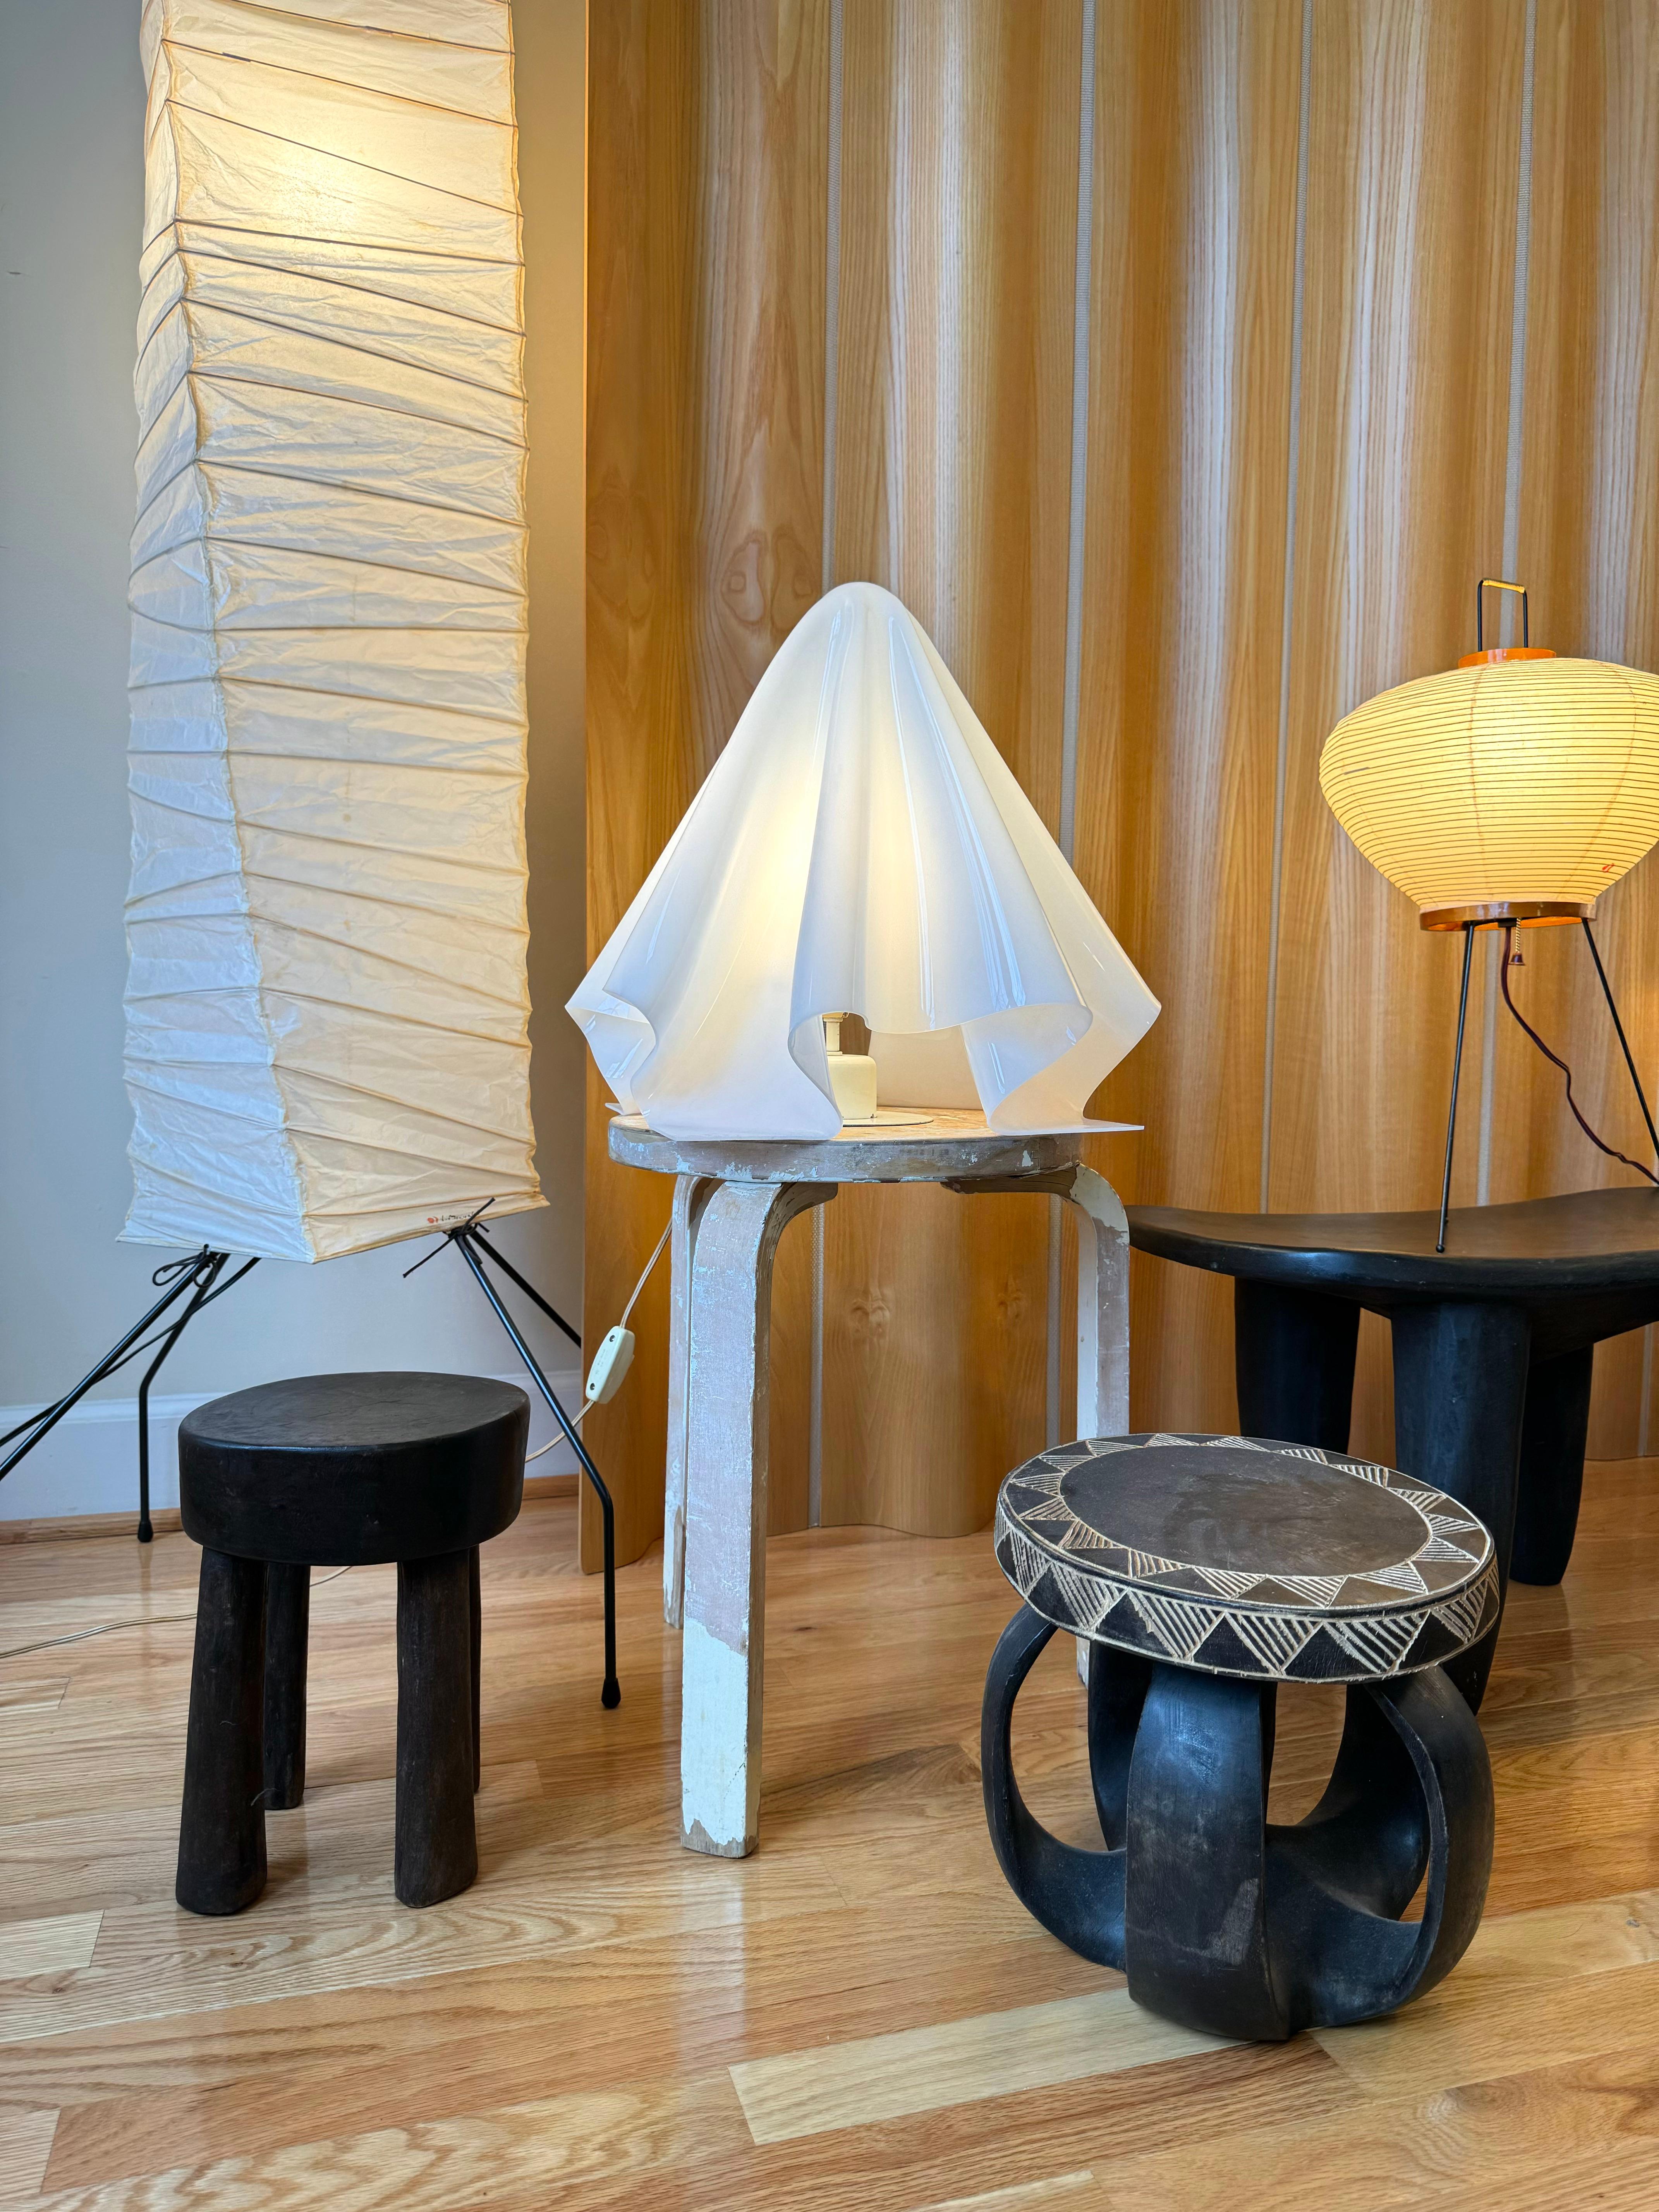 Rare early K-series (Oba- Q/Ghost) table lamp by Shiro Kuramata (Medium size) In Good Condition For Sale In Centreville, VA